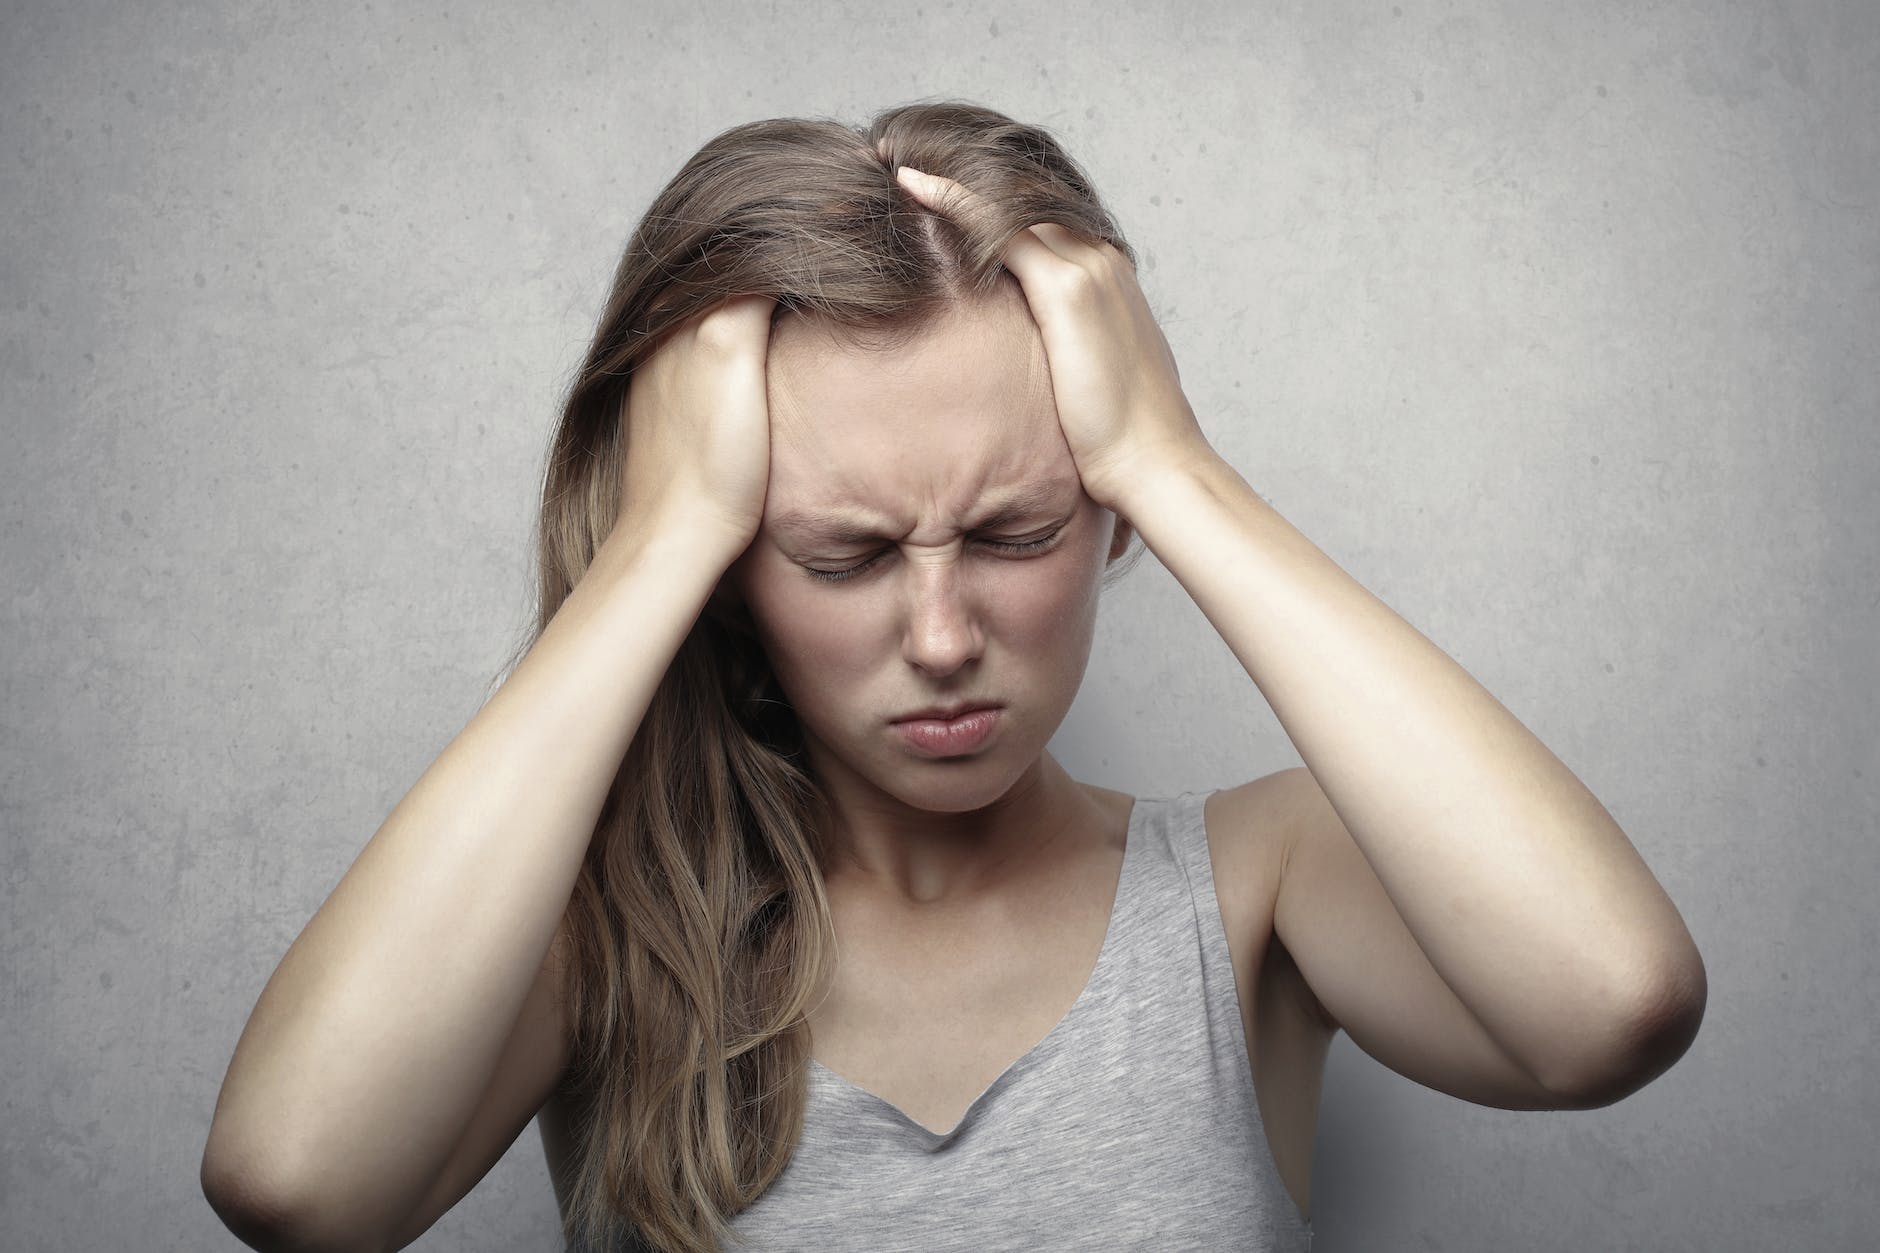 Hair loss from stress: woman in gray tank top showing distress